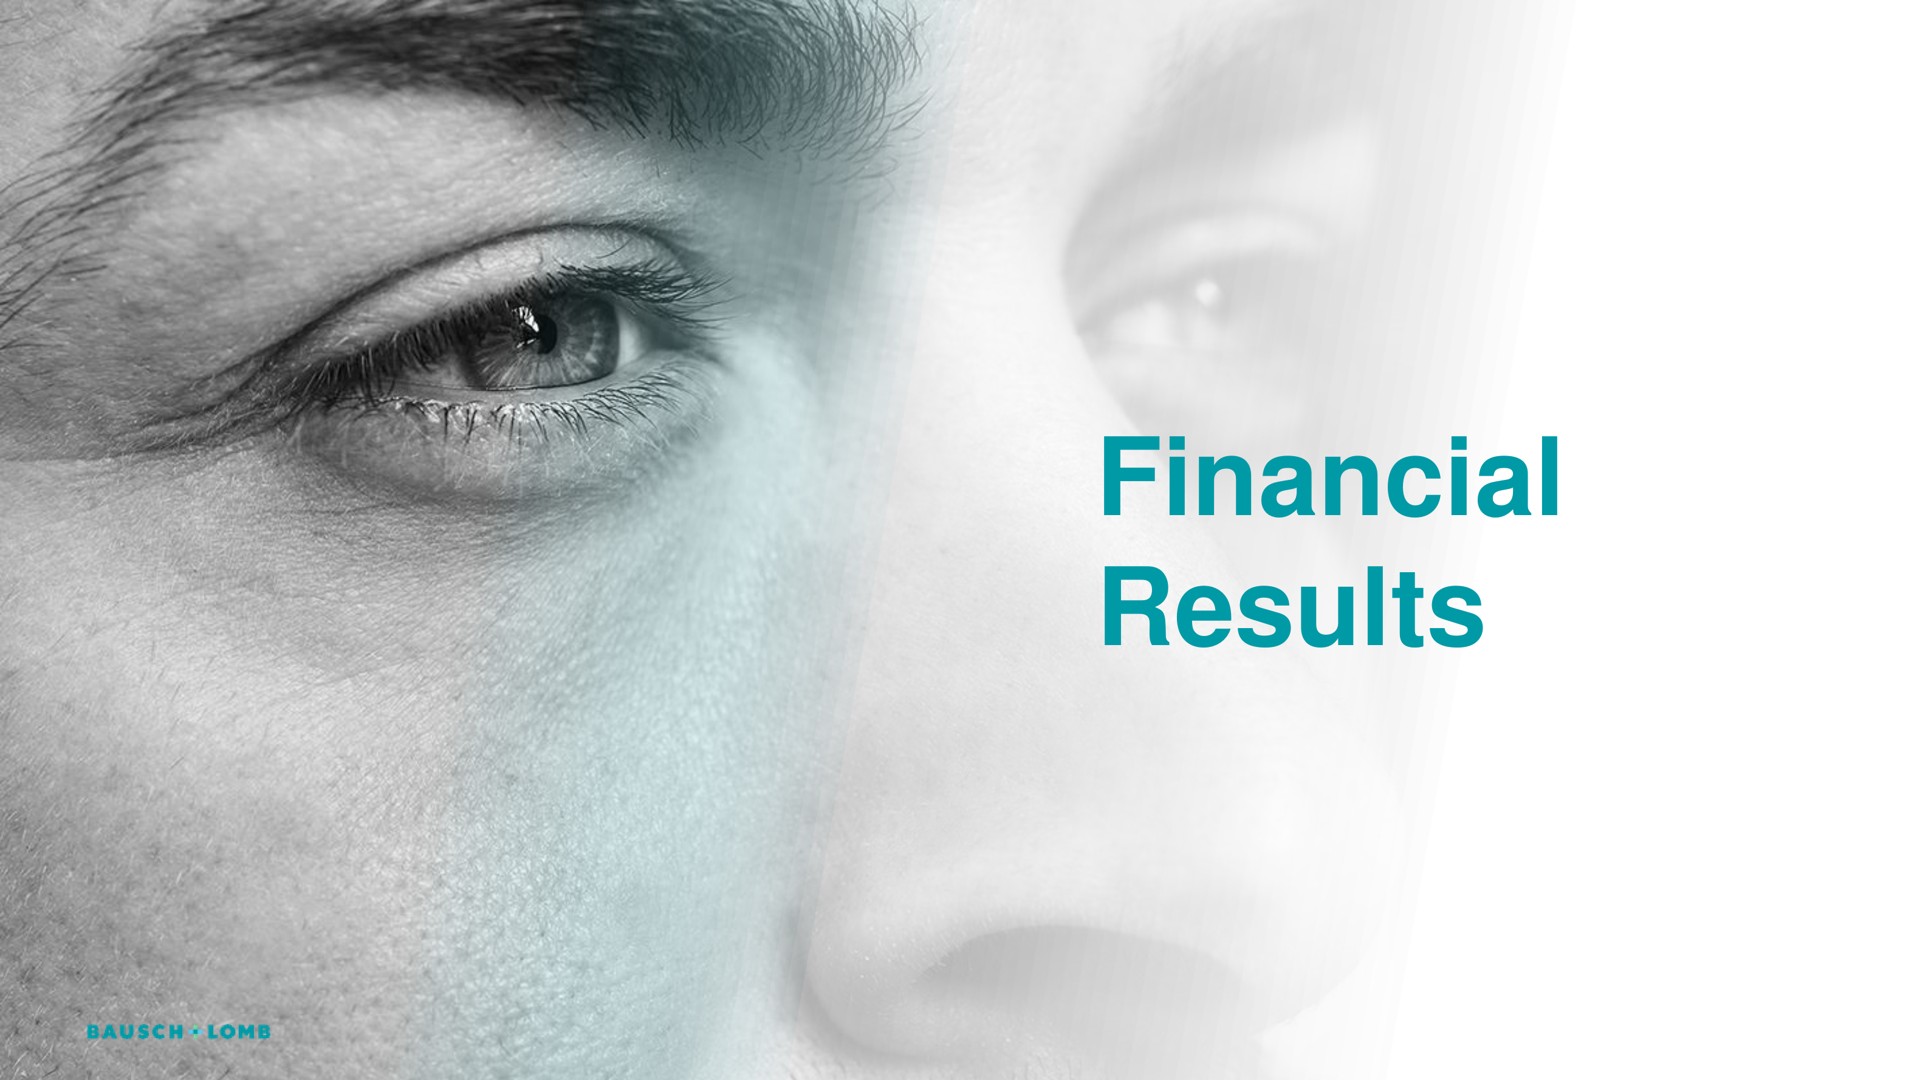 financial results | Bausch+Lomb